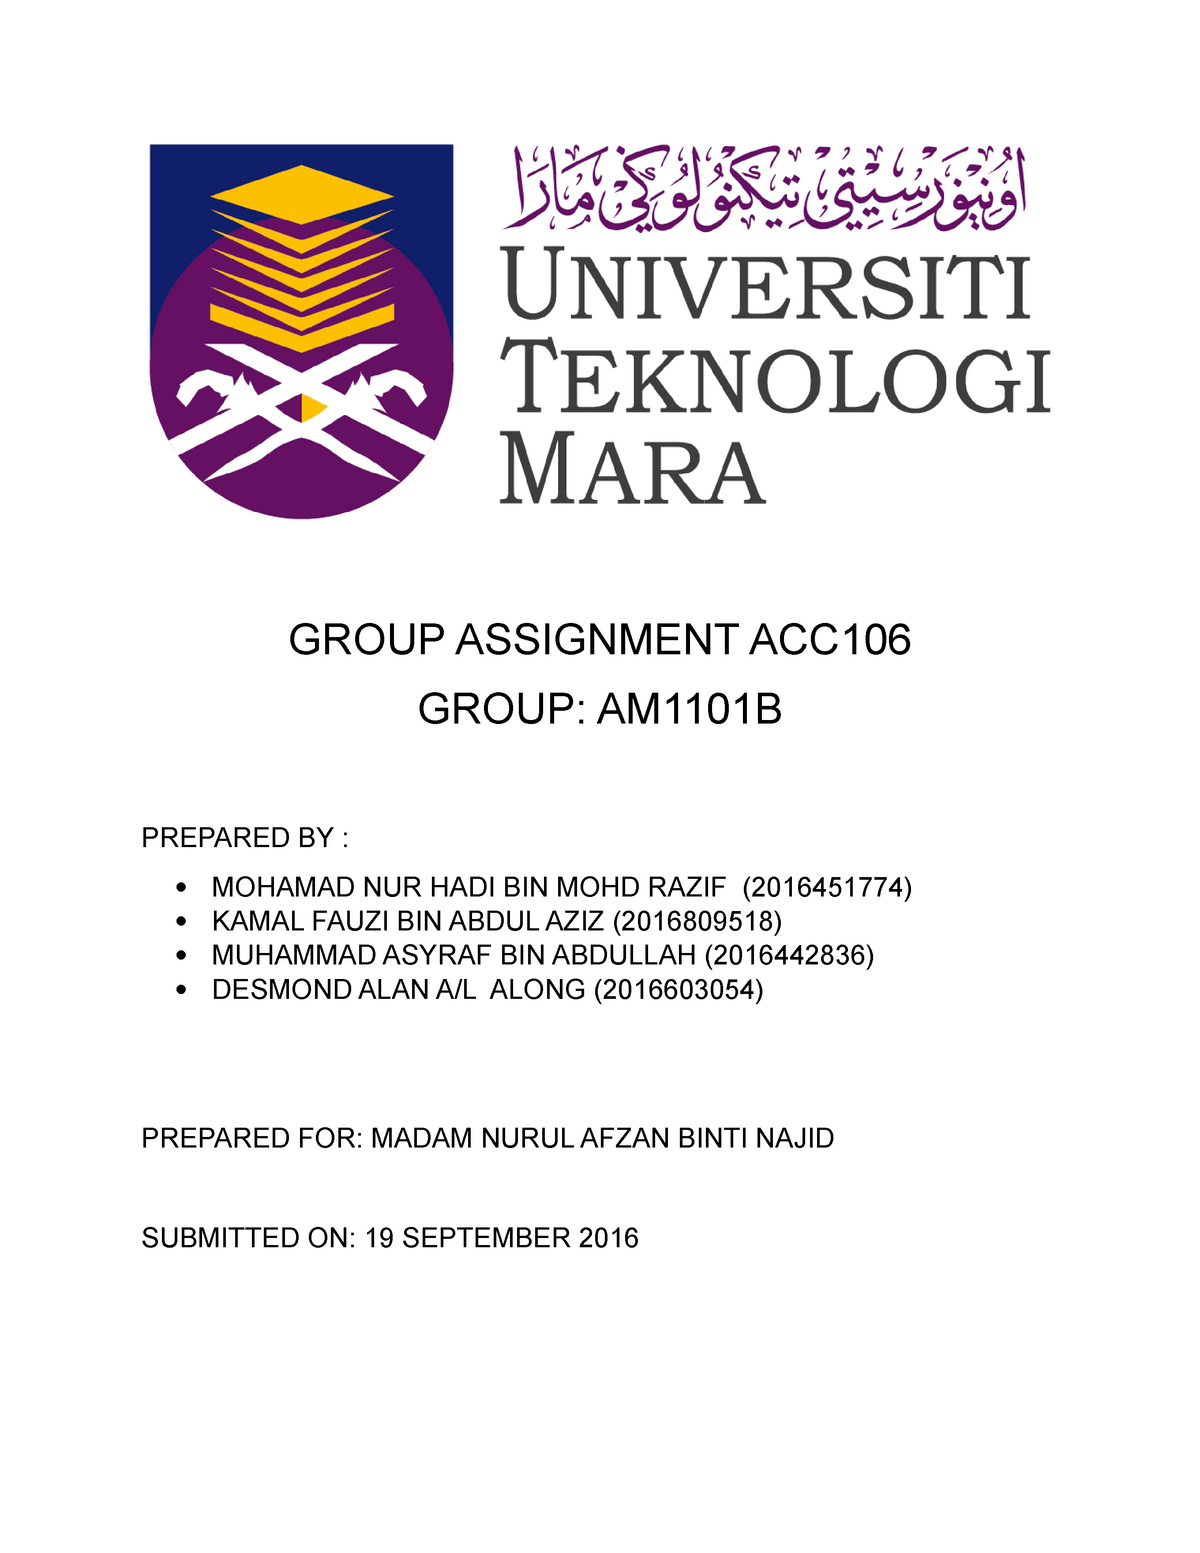 group assignment acc106